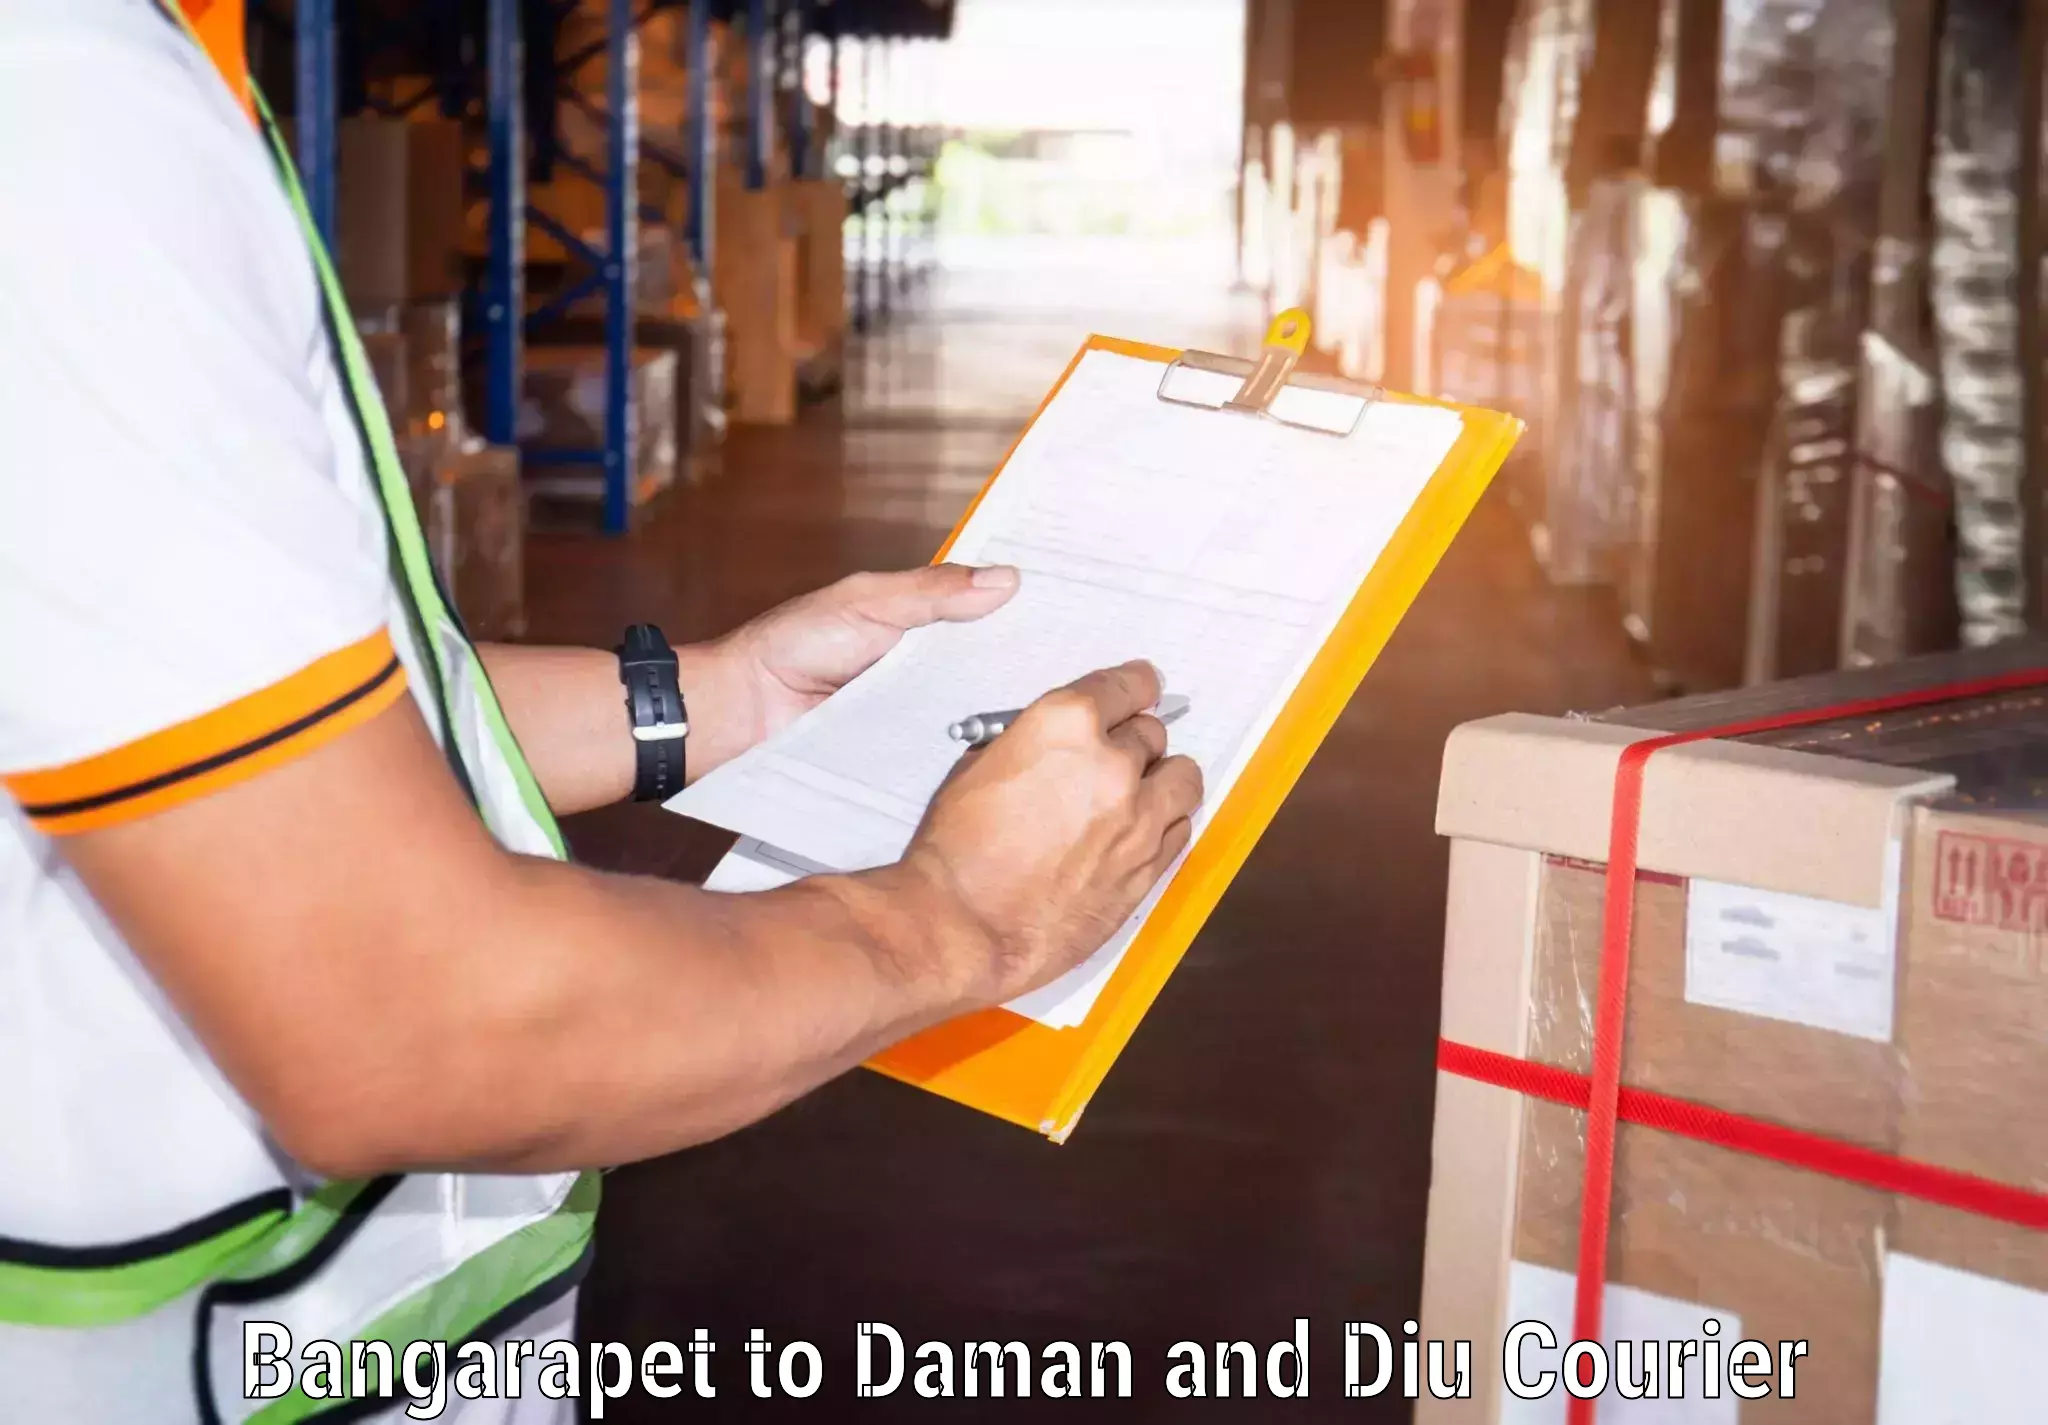 Reliable courier services Bangarapet to Daman and Diu